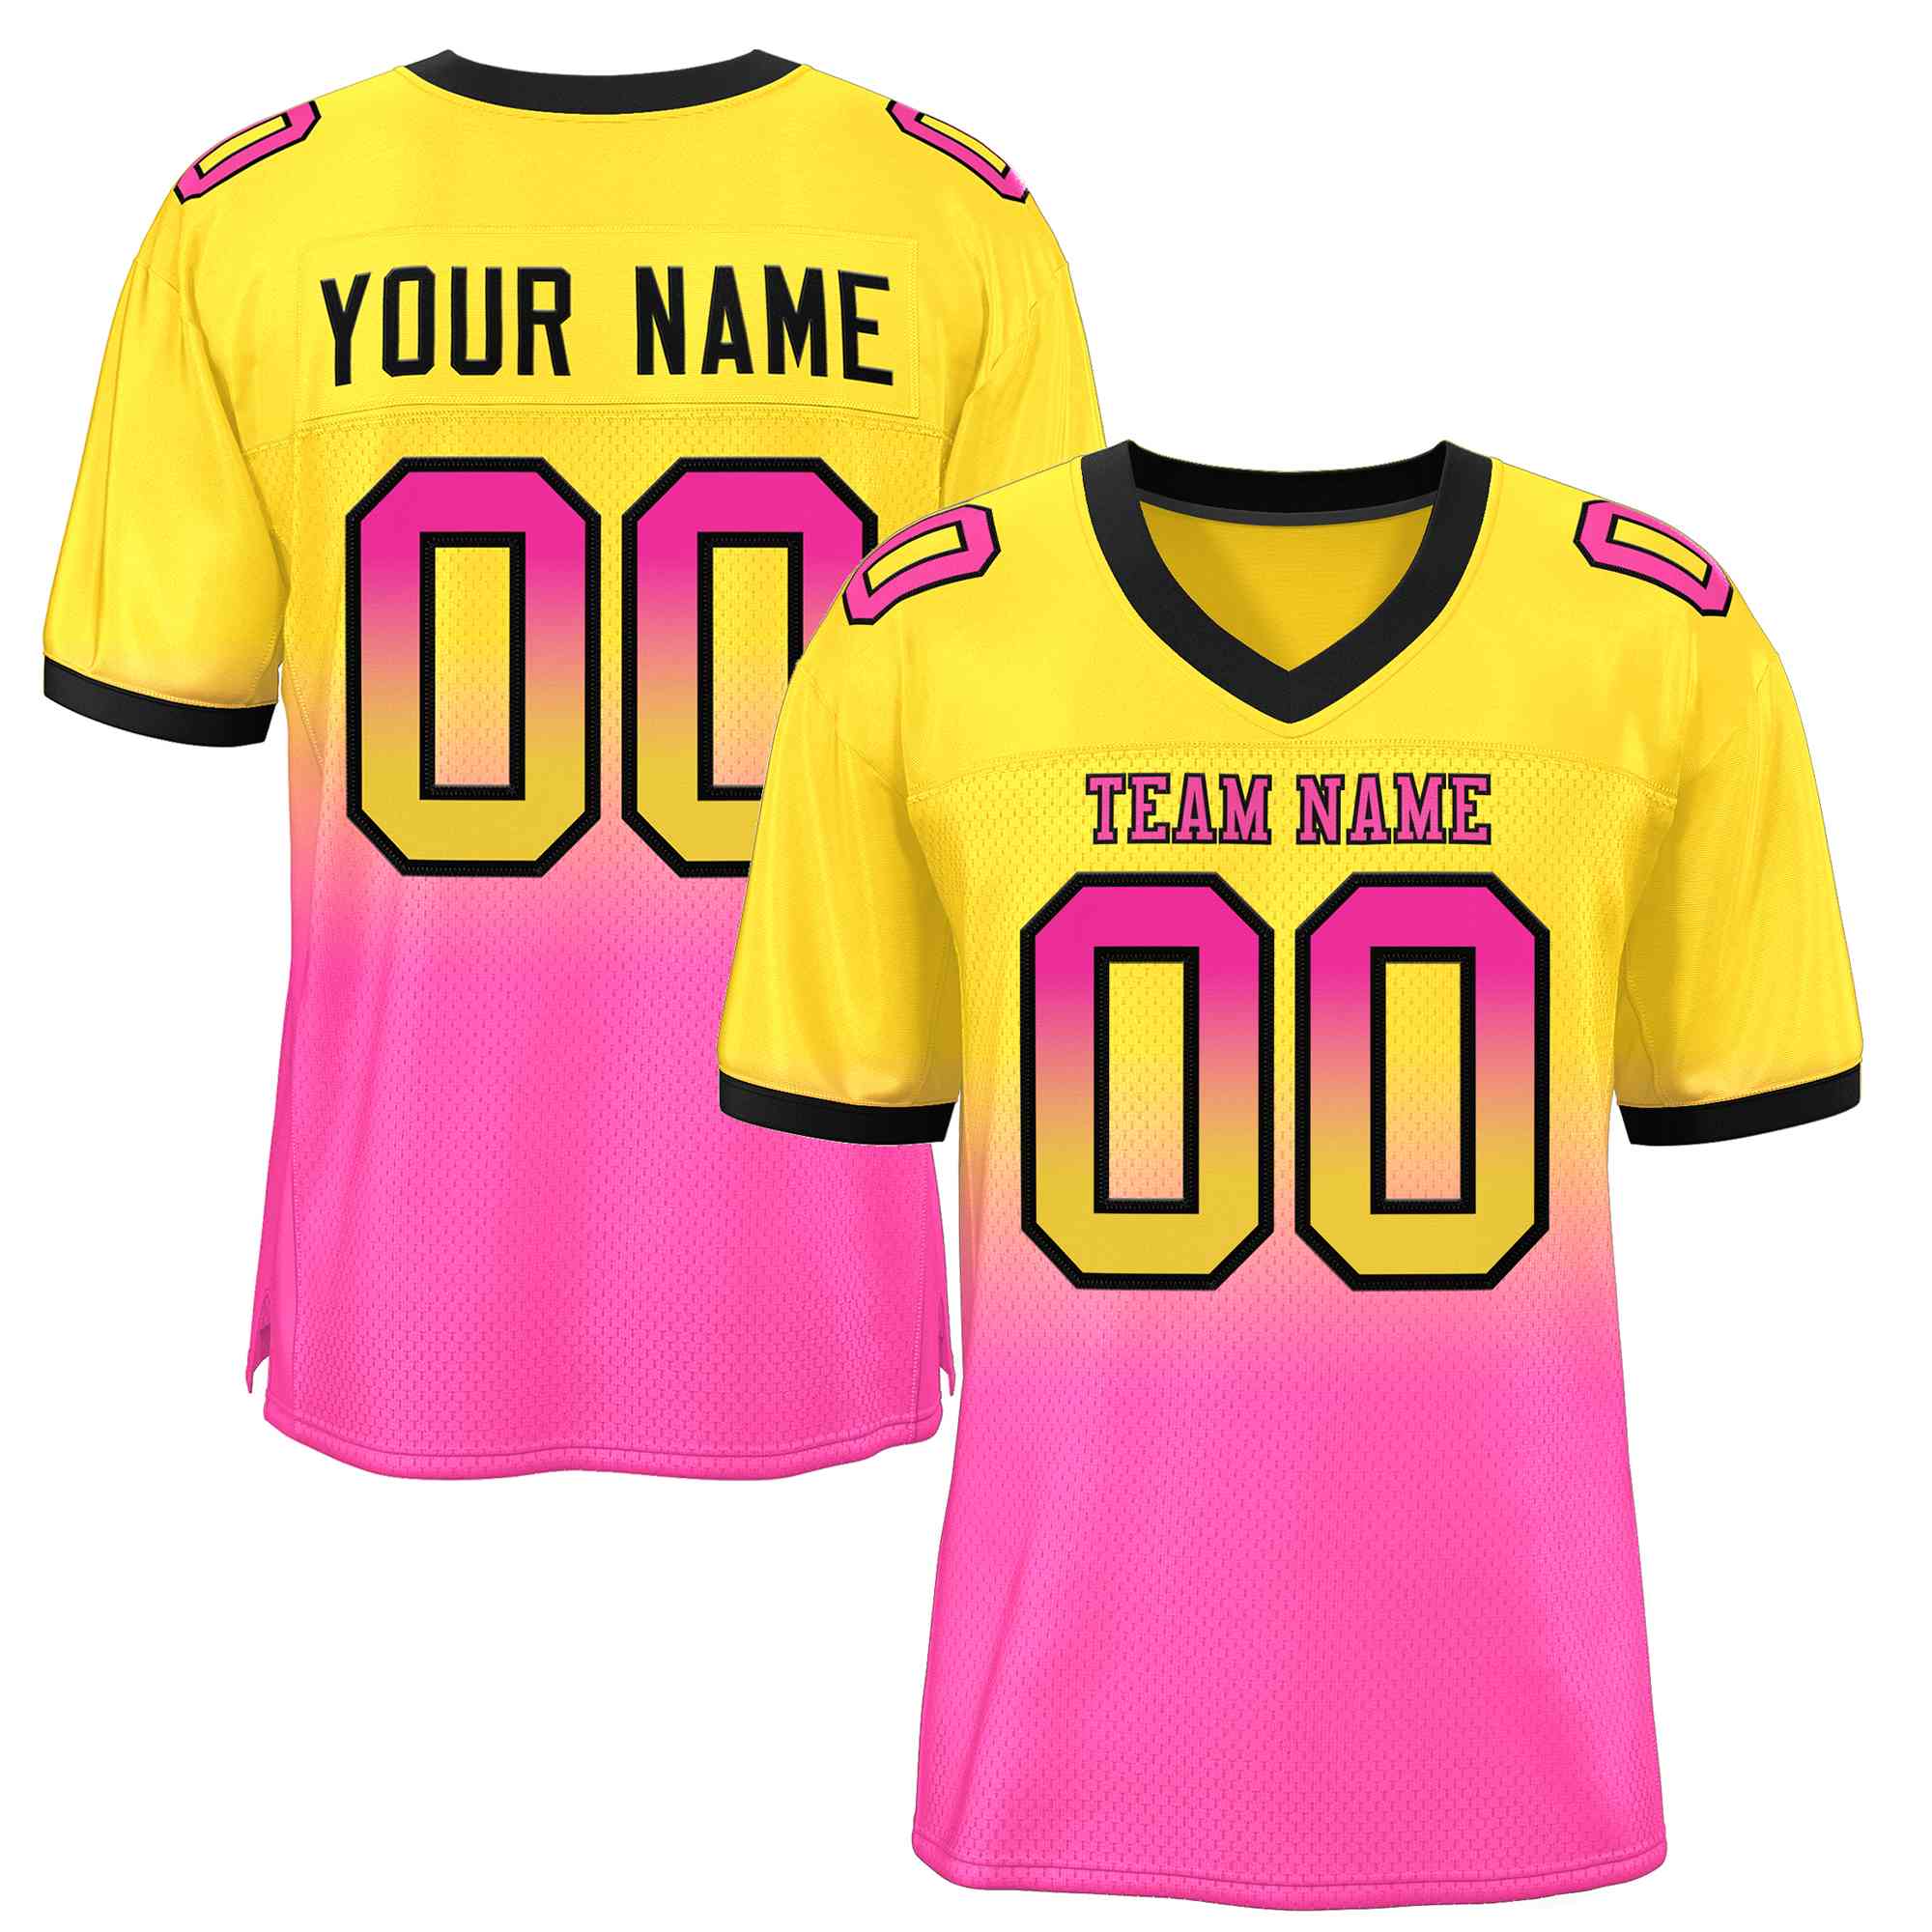 Personalized Name and Number Purple and Black Fashion Football T